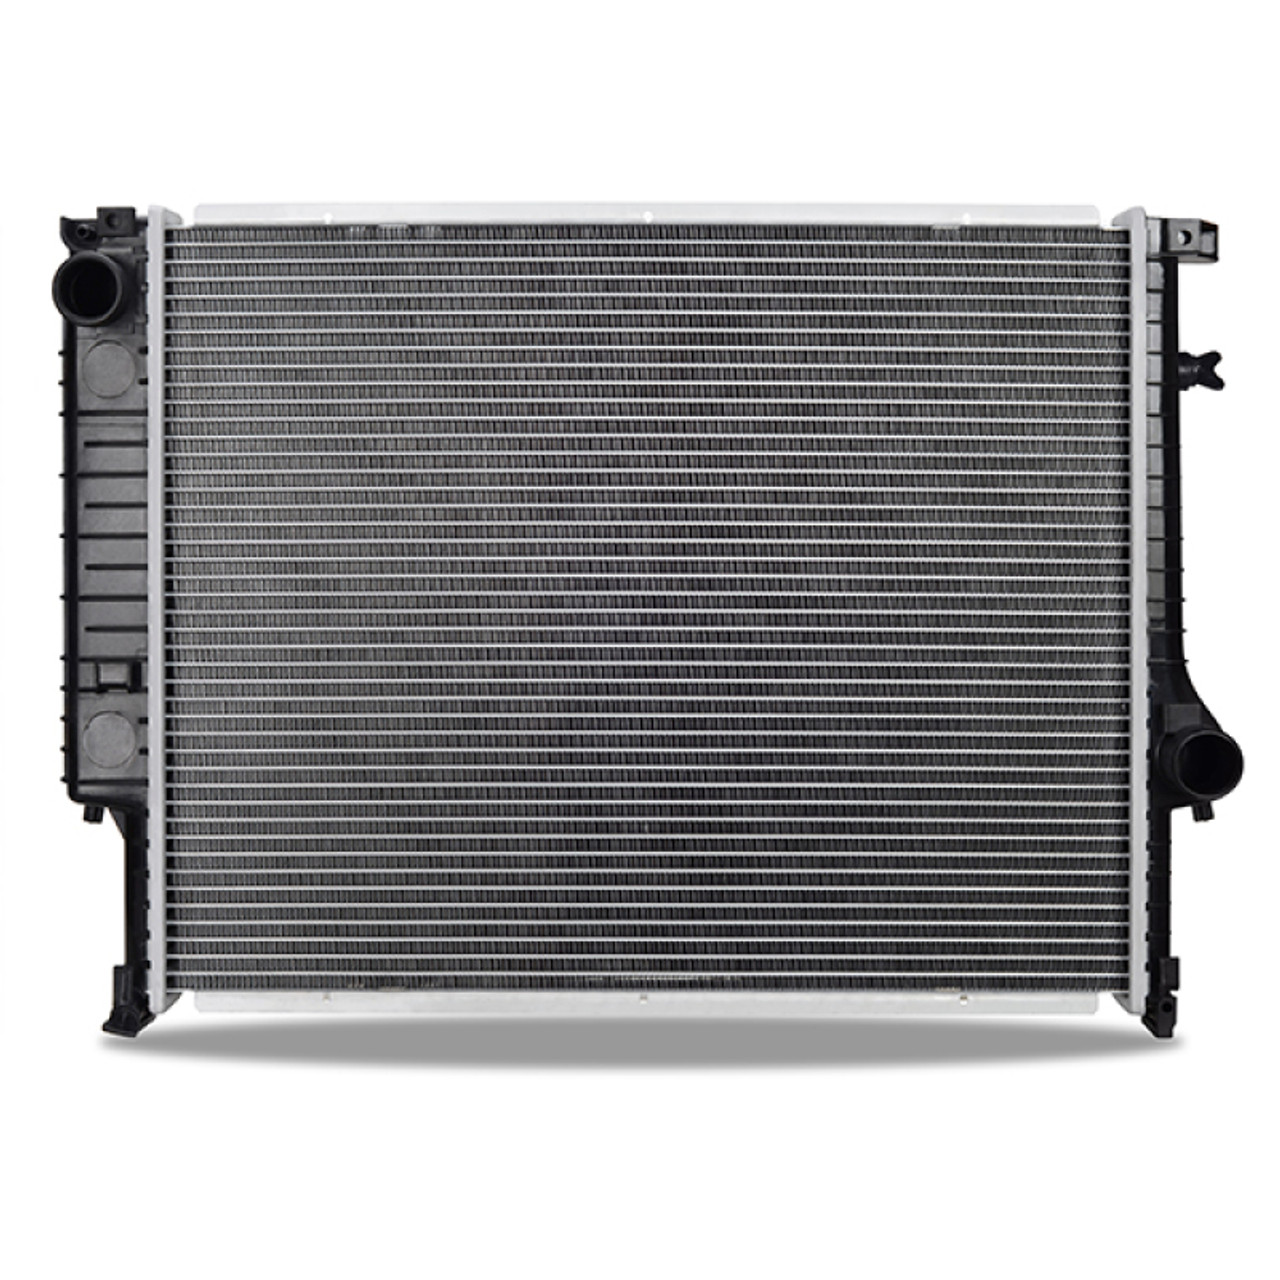 Mishimoto BMW E36 3-Series Replacement Radiator 1992-1999 - R1841-MT Photo - out of package